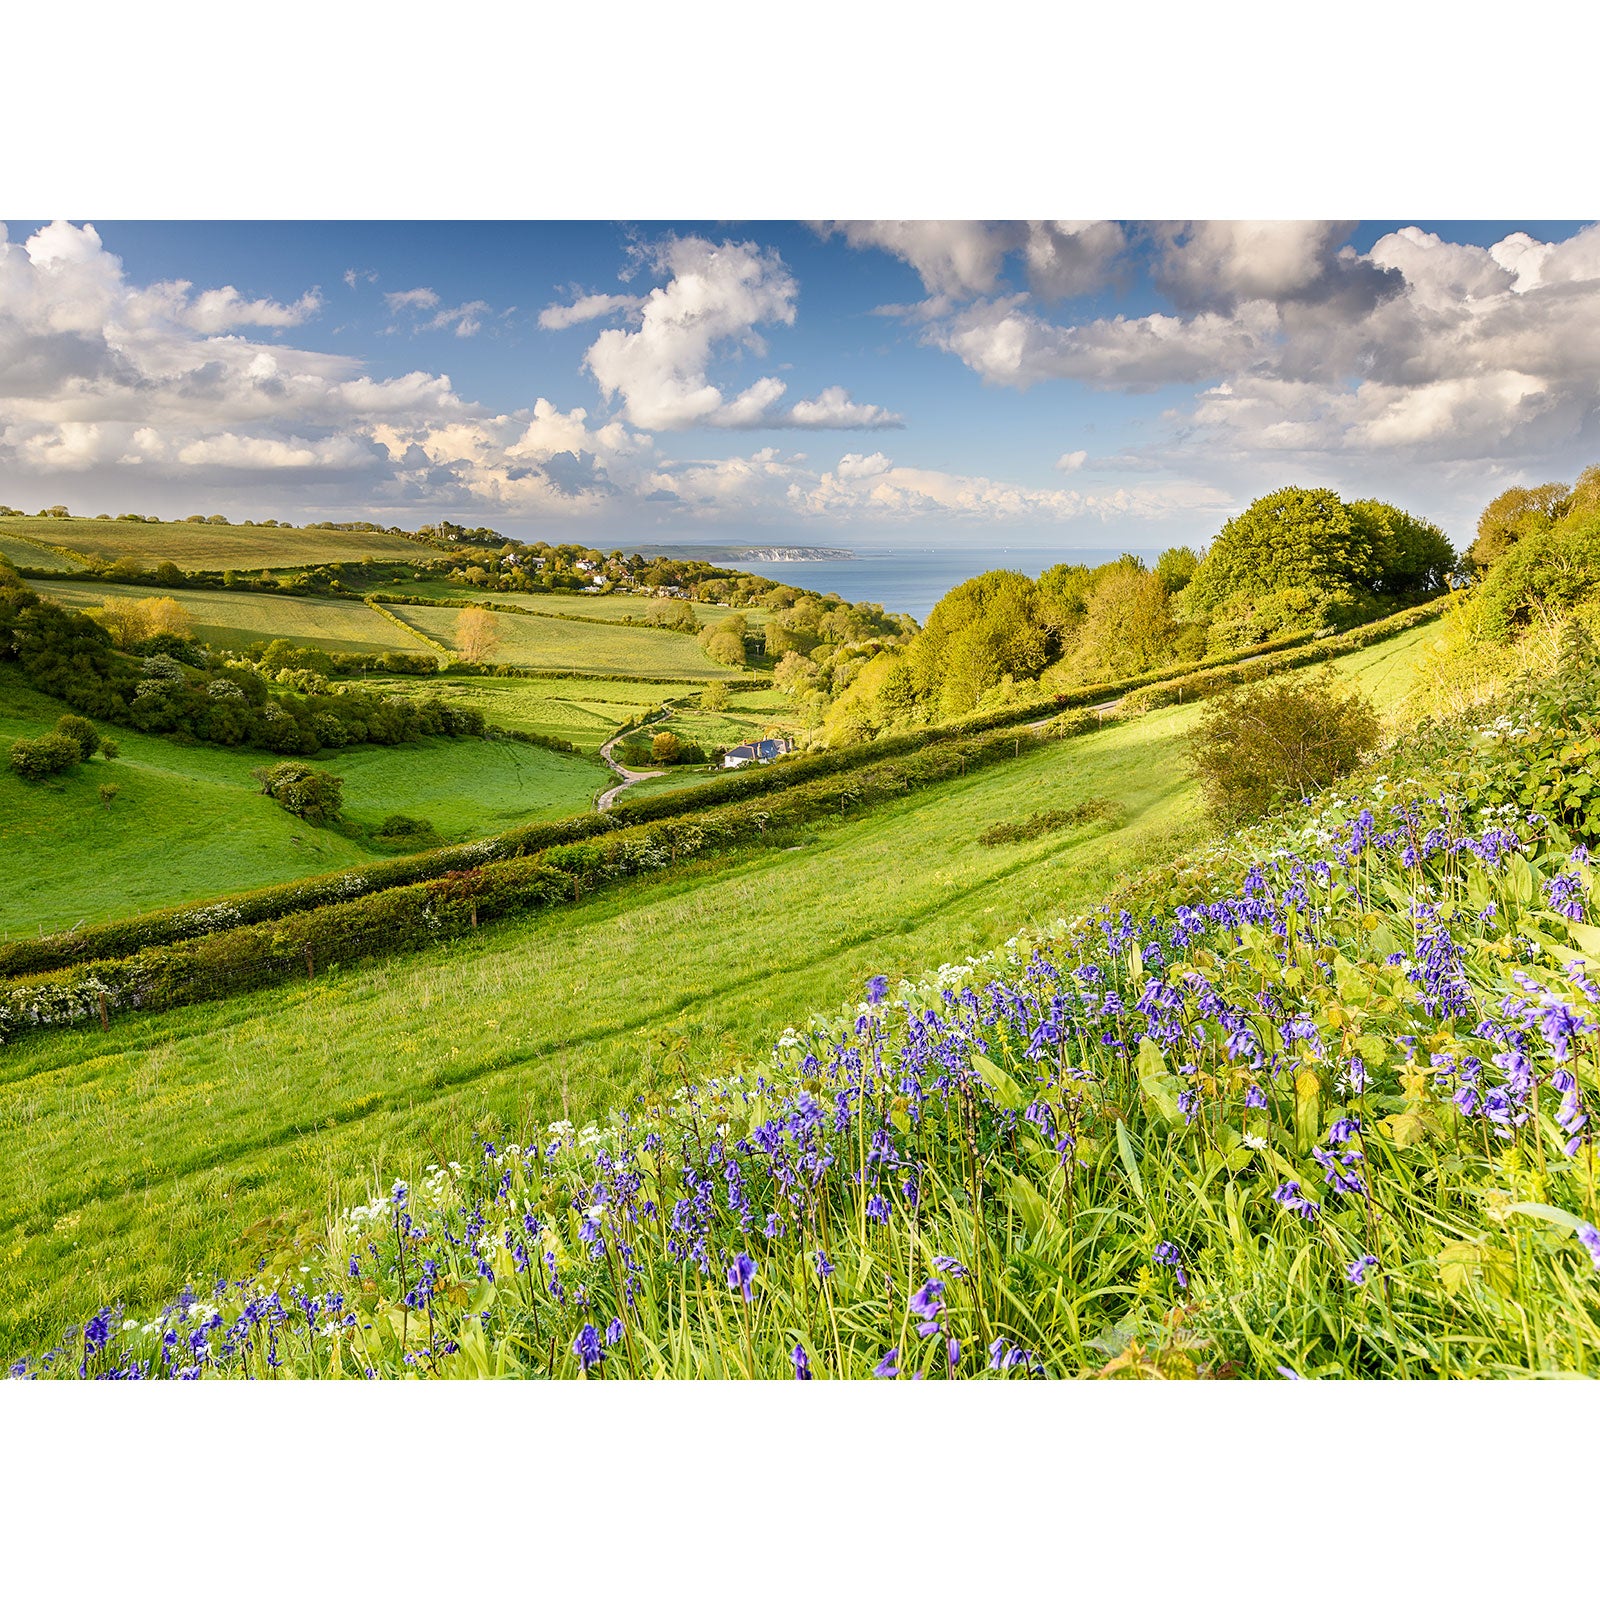 Bluebells, Luccombe - Available Light Photography